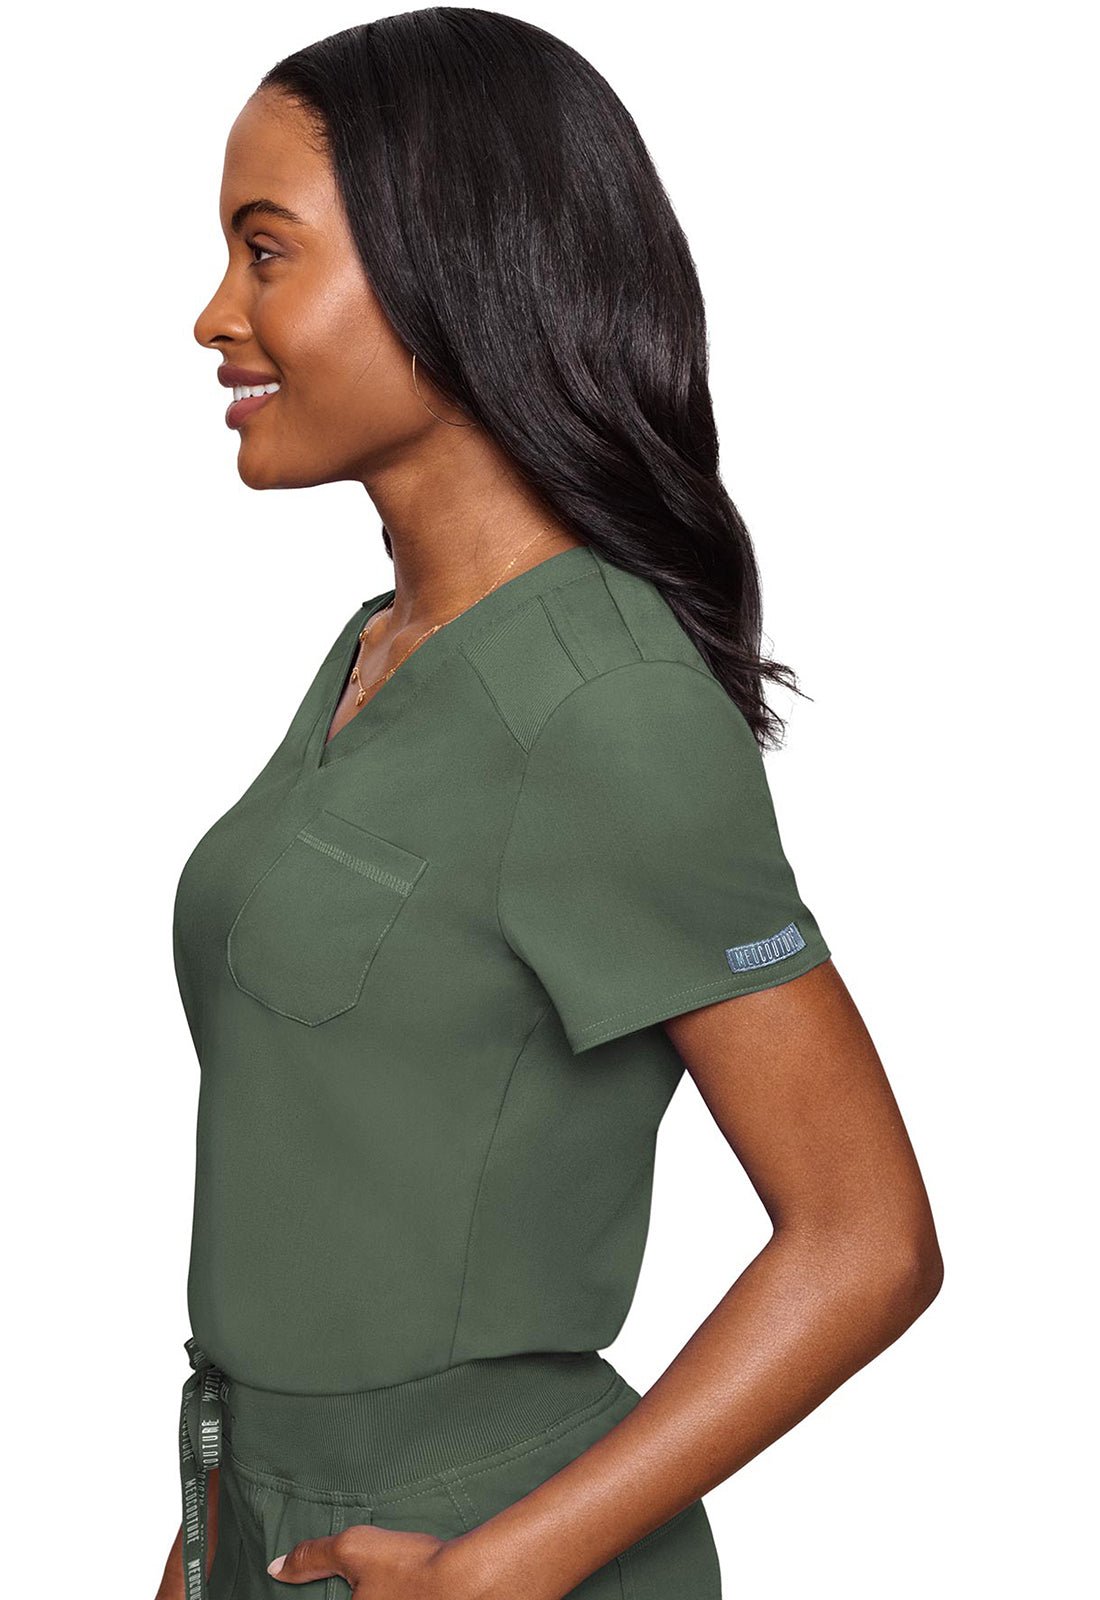 Med Couture Touch V Neck Scrub Top MC7448 in Black, Caribbean, Ciel, Navy, Pewter, Royal, Wine - Scrubs Select